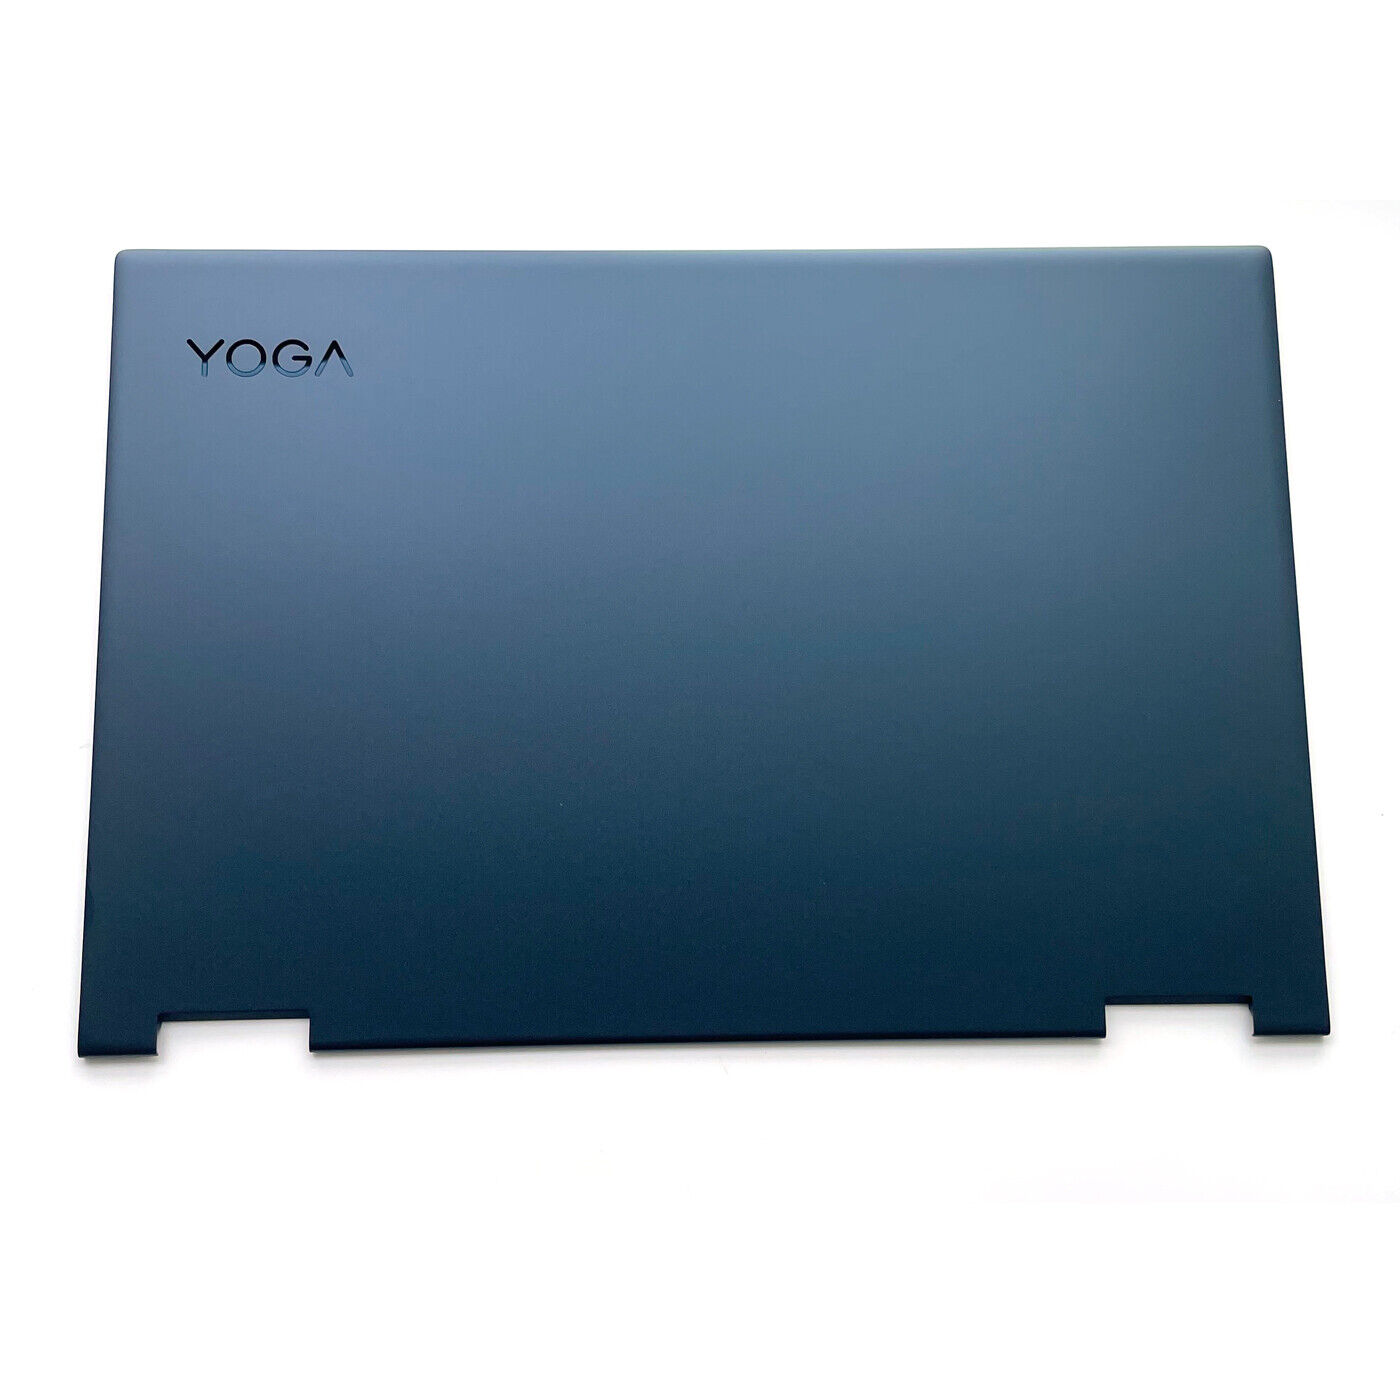 New For Lenovo Yoga 730-15 730-15IKB 730-15IWL LCD Back Cover Blue AM27G000E20